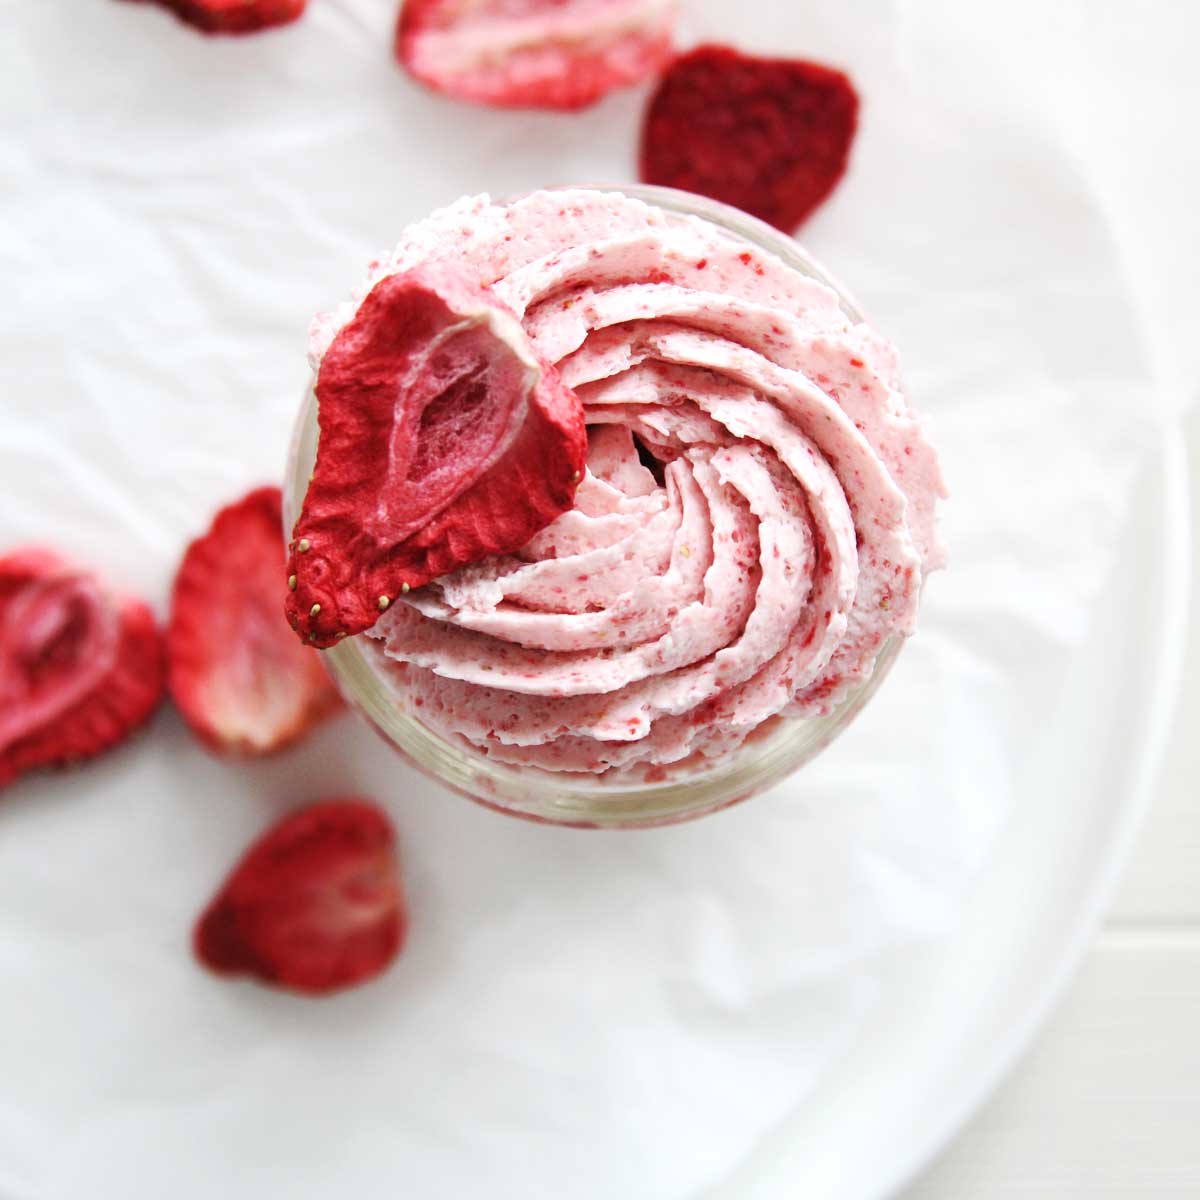 So Simple! Strawberry Whipped Cream (Chantilly Cream) Recipe - Strawberry Whipped Cream